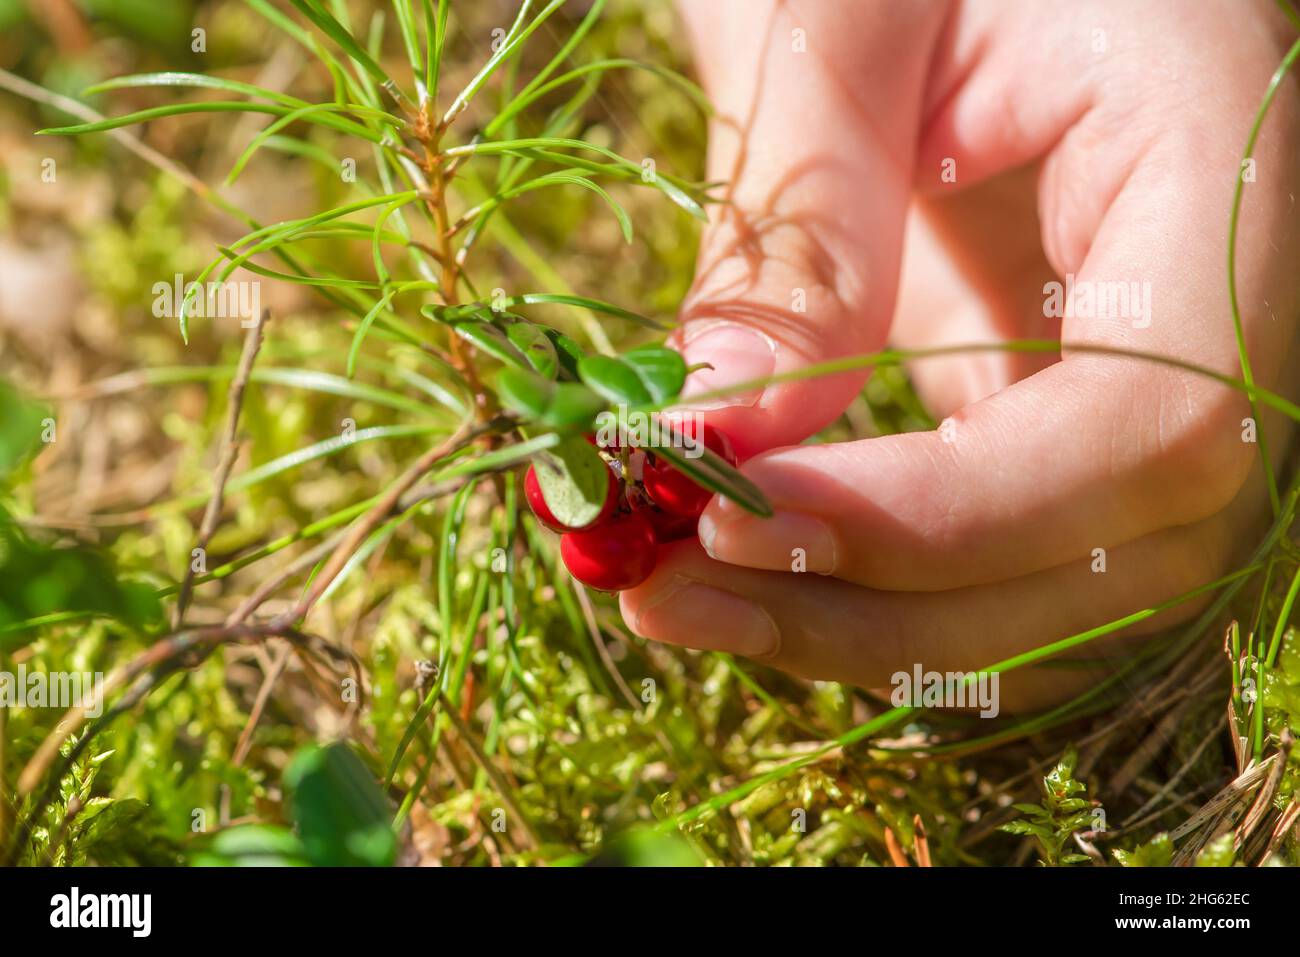 Ripe cranberries. Red juicy cranberries on a green bush in a sunny forest. Women's hands picking lingonberries Stock Photo